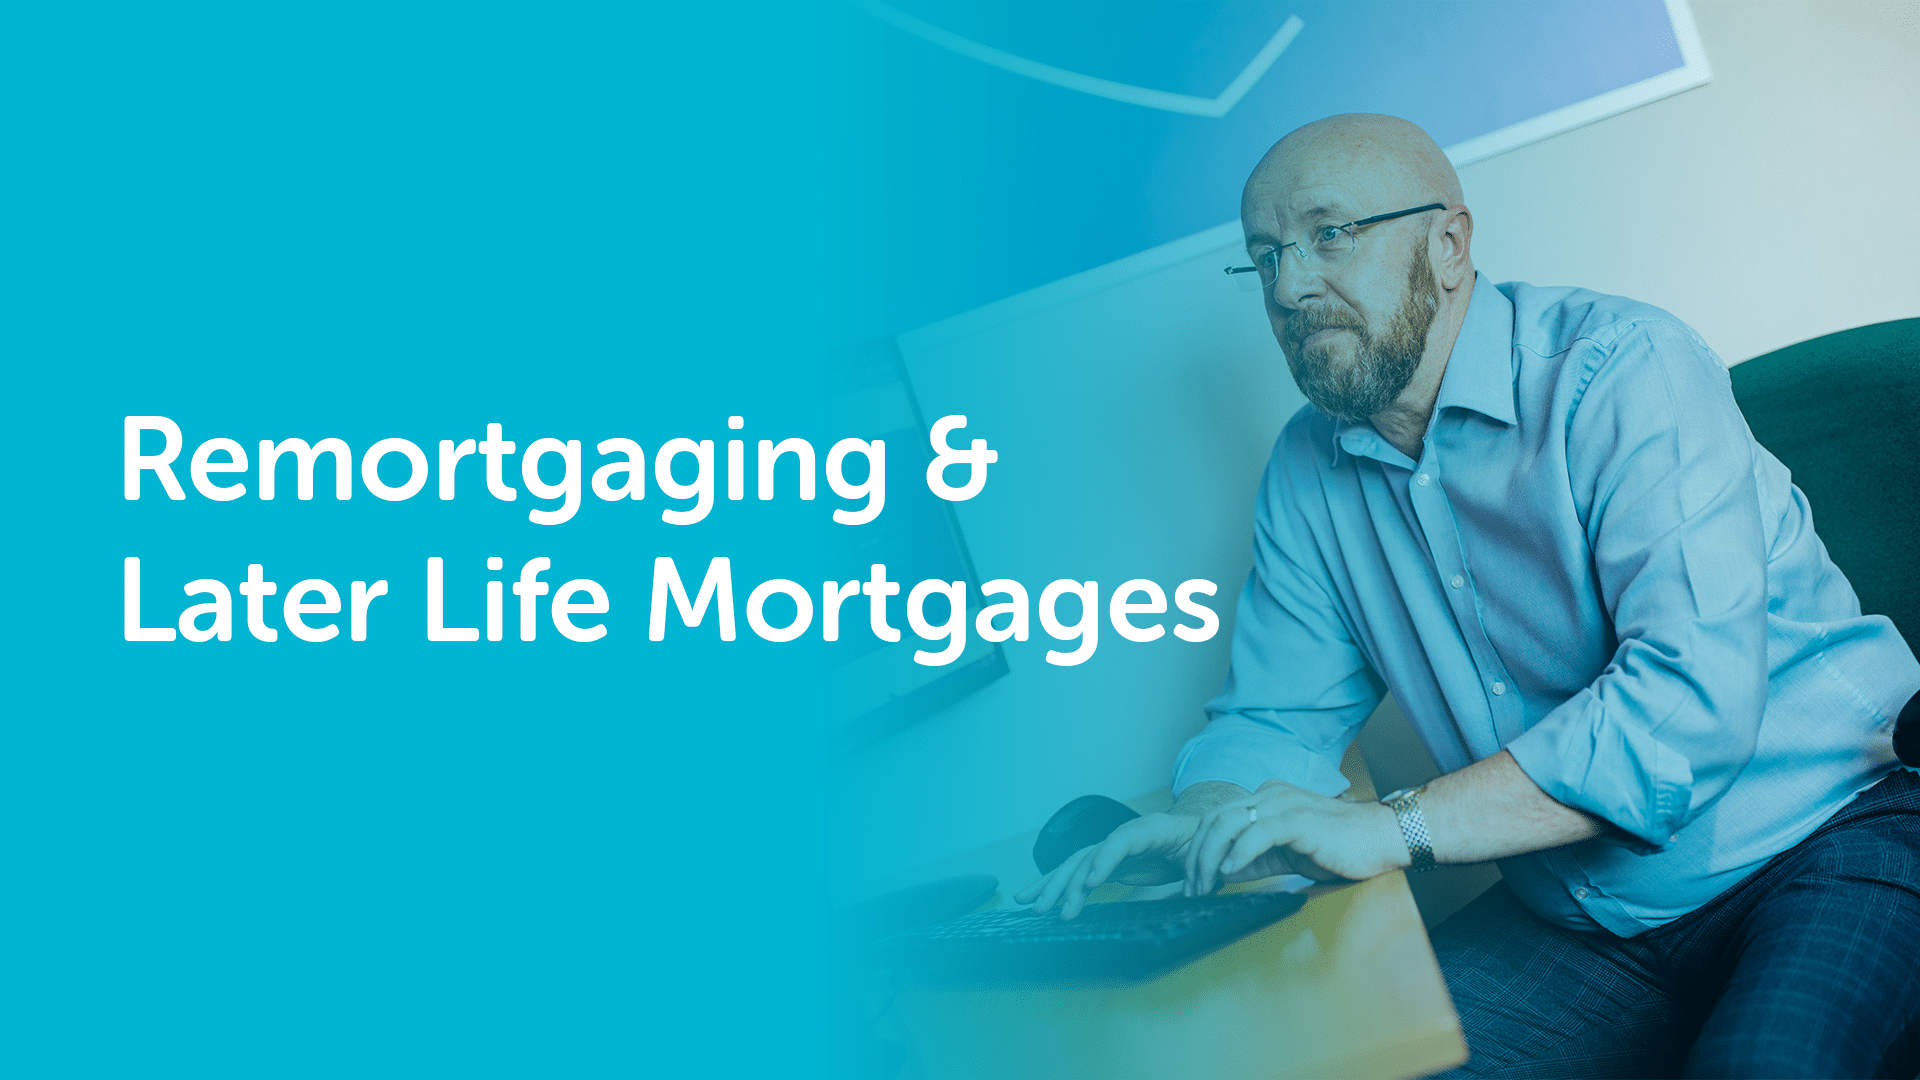 Remortgage & Later Life Mortgages